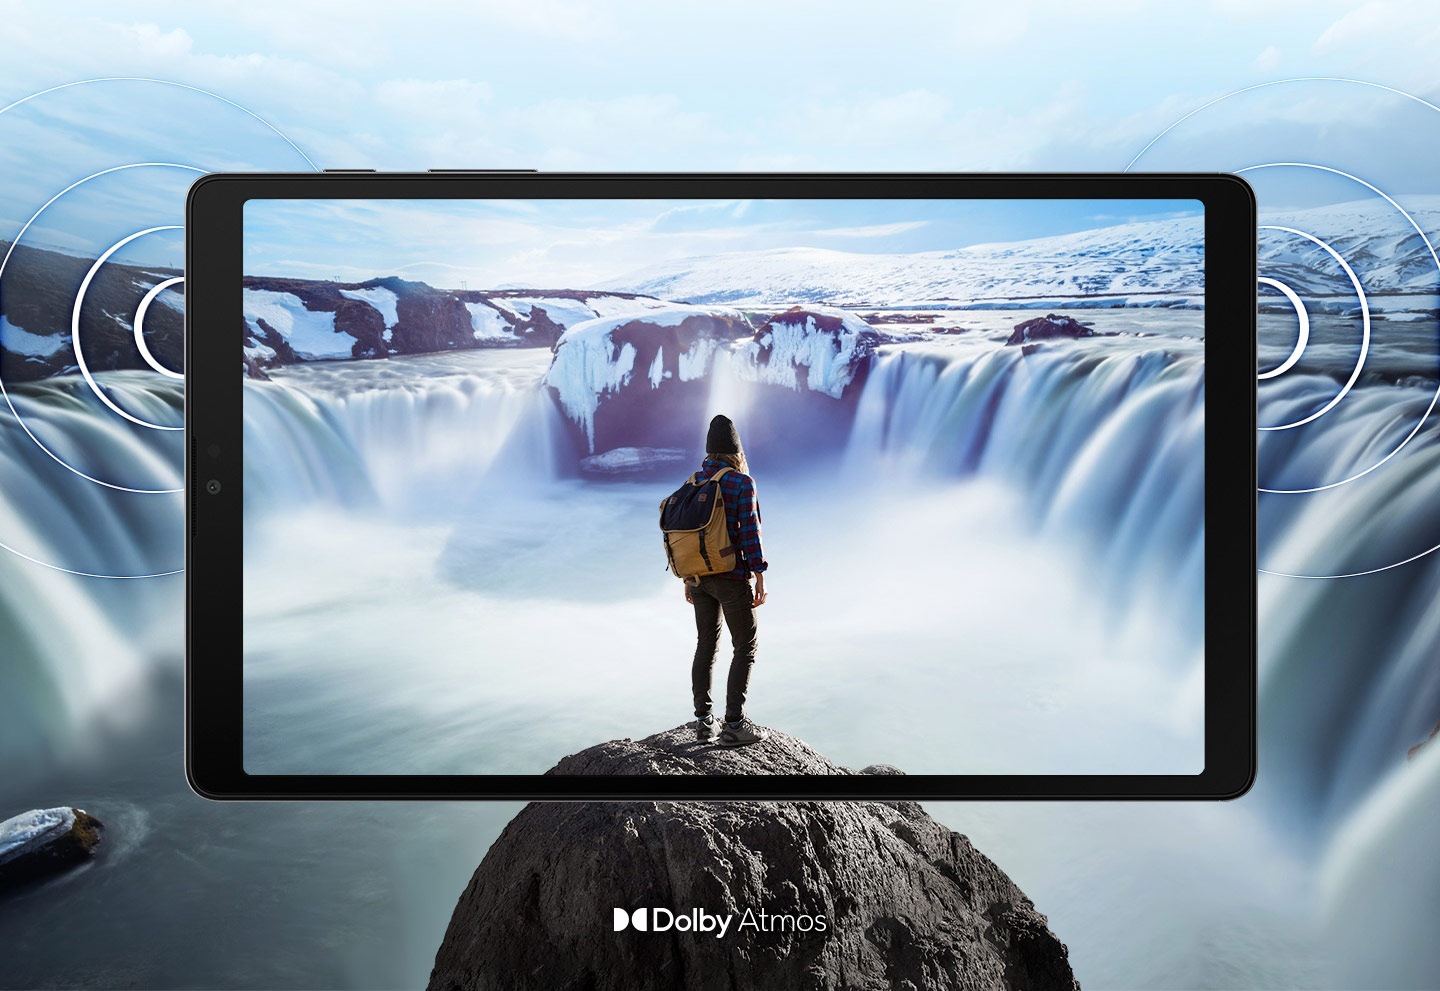 Less bezel means more room for a bigger, 8.7 inch display on a conveniently compact tablet. Enjoy an impromptu private screening in the park or binge watch in bed with dual speakers in landscape orientation that deliver rich, stereo sound.